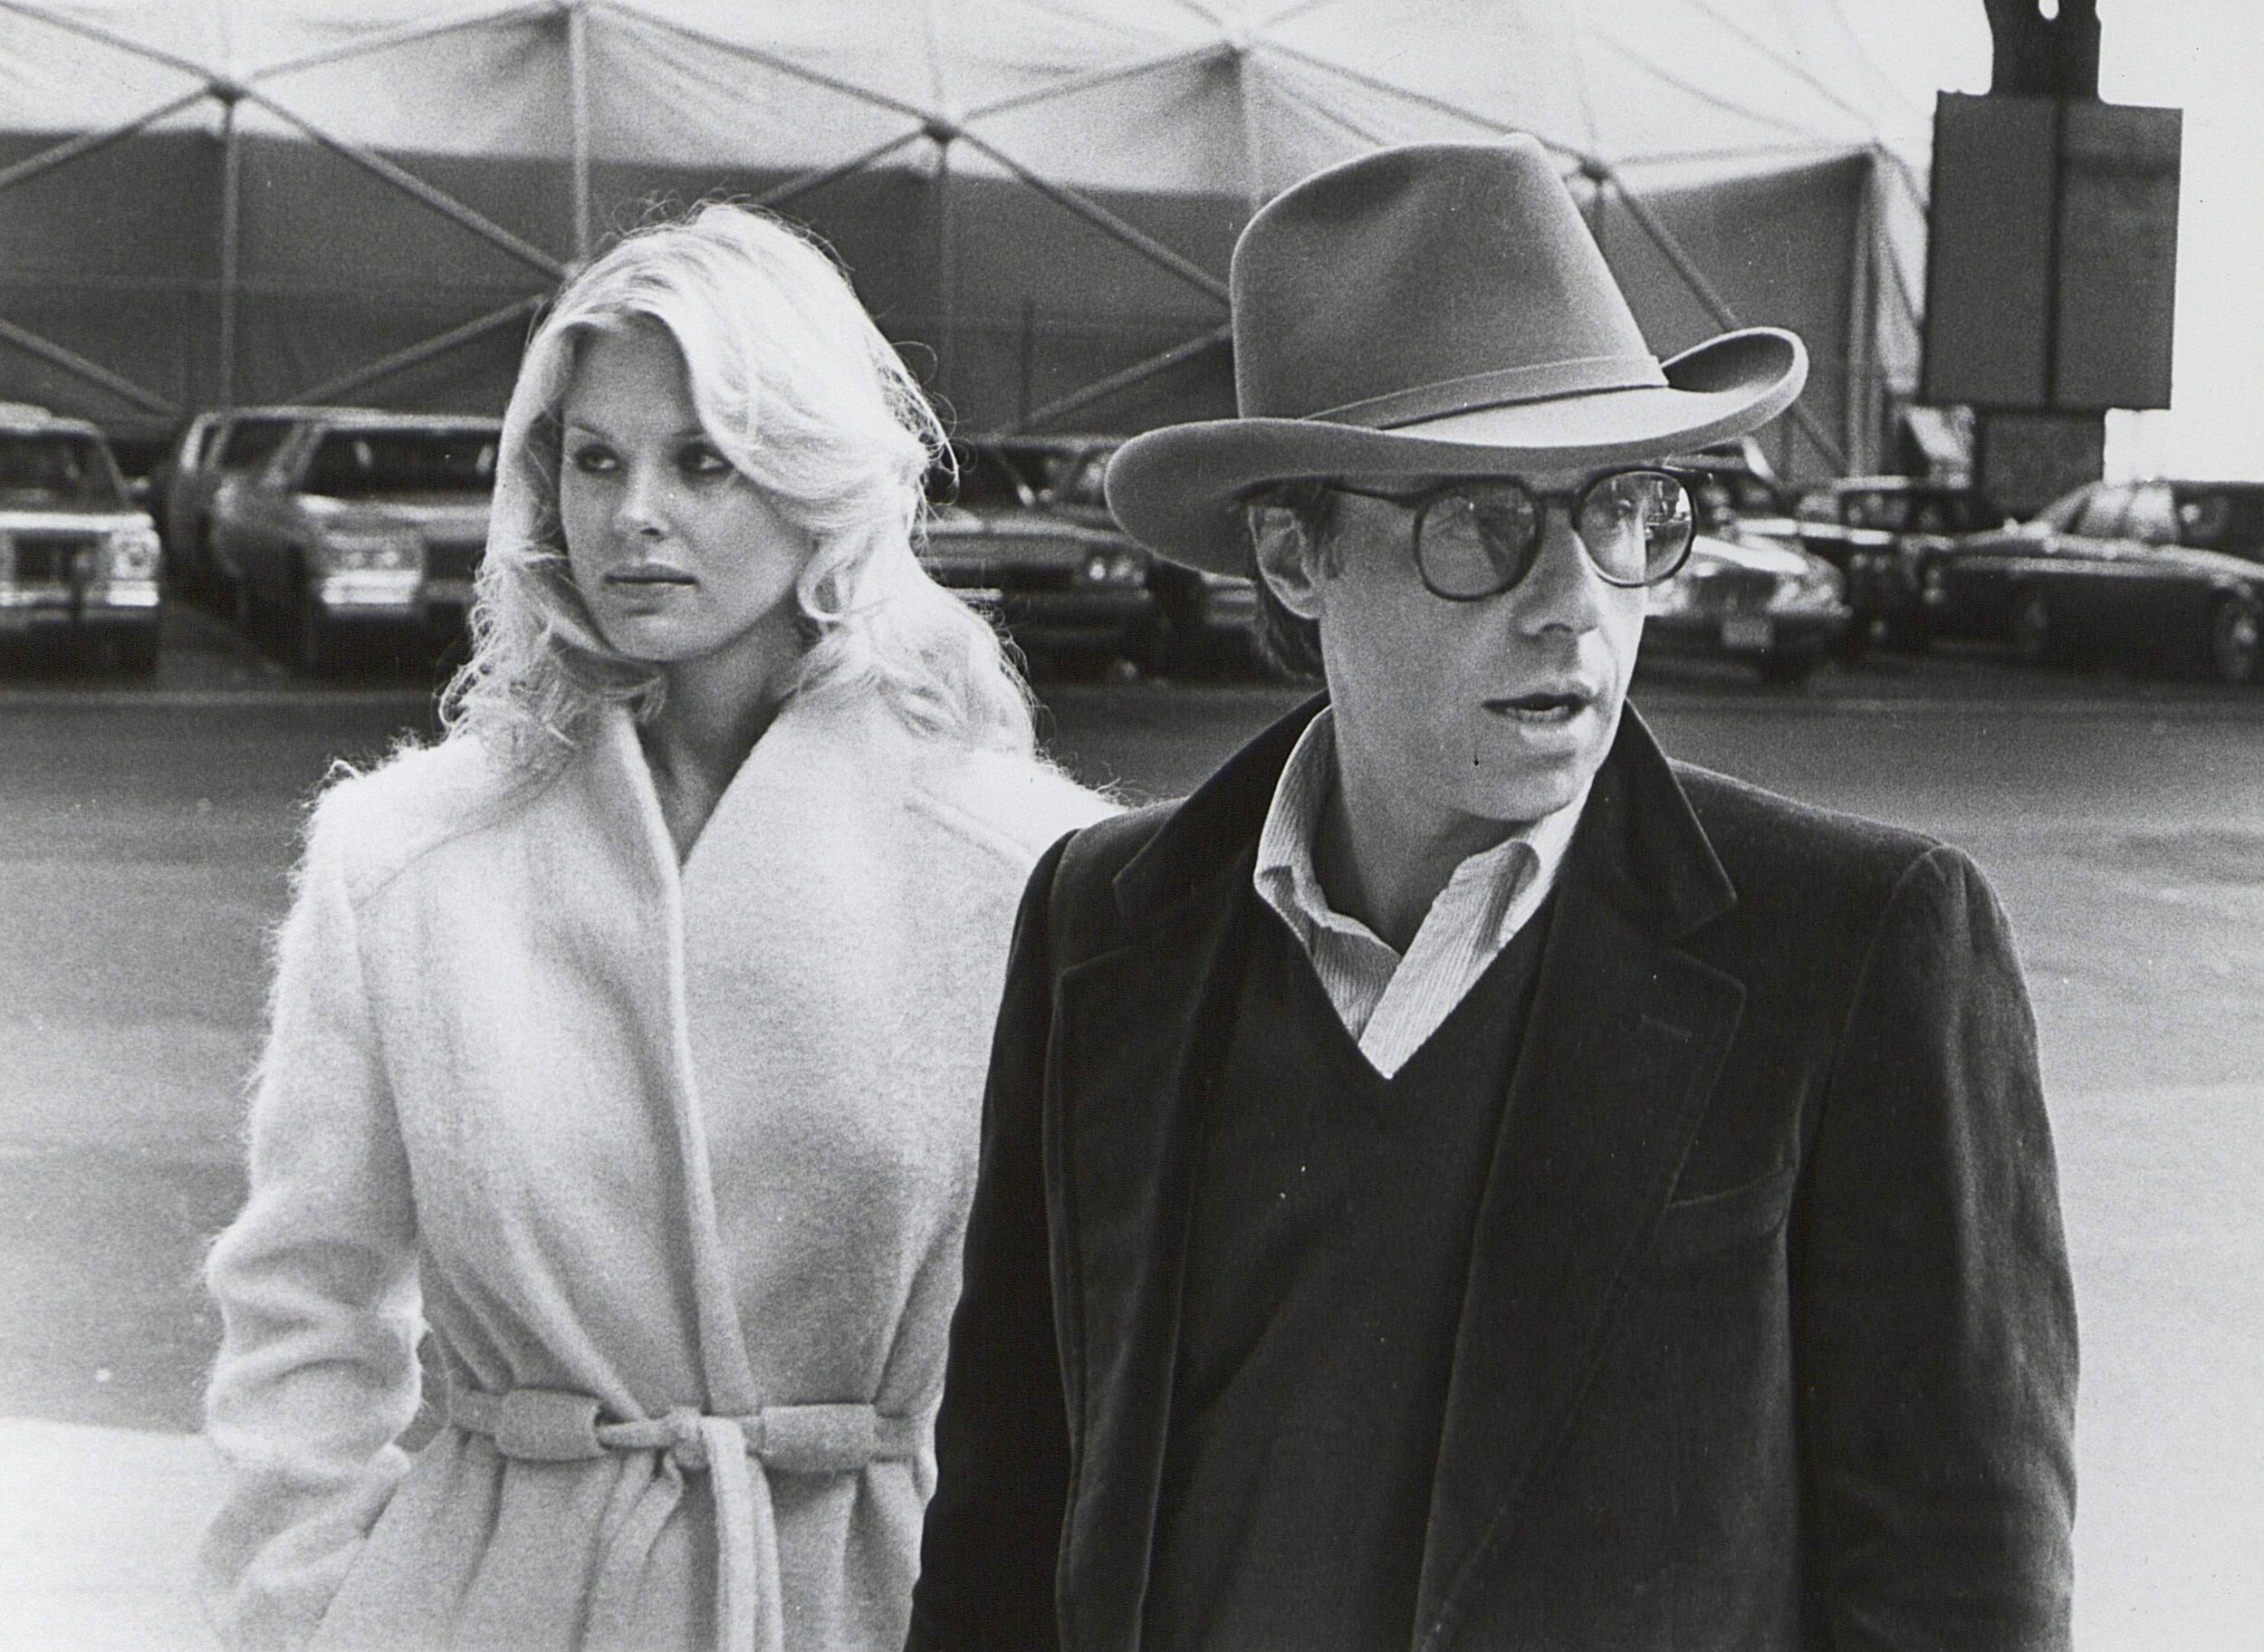 Bogdanovich and Stratten, 1980, Time & Life Pictures/The LIFE Pictu...